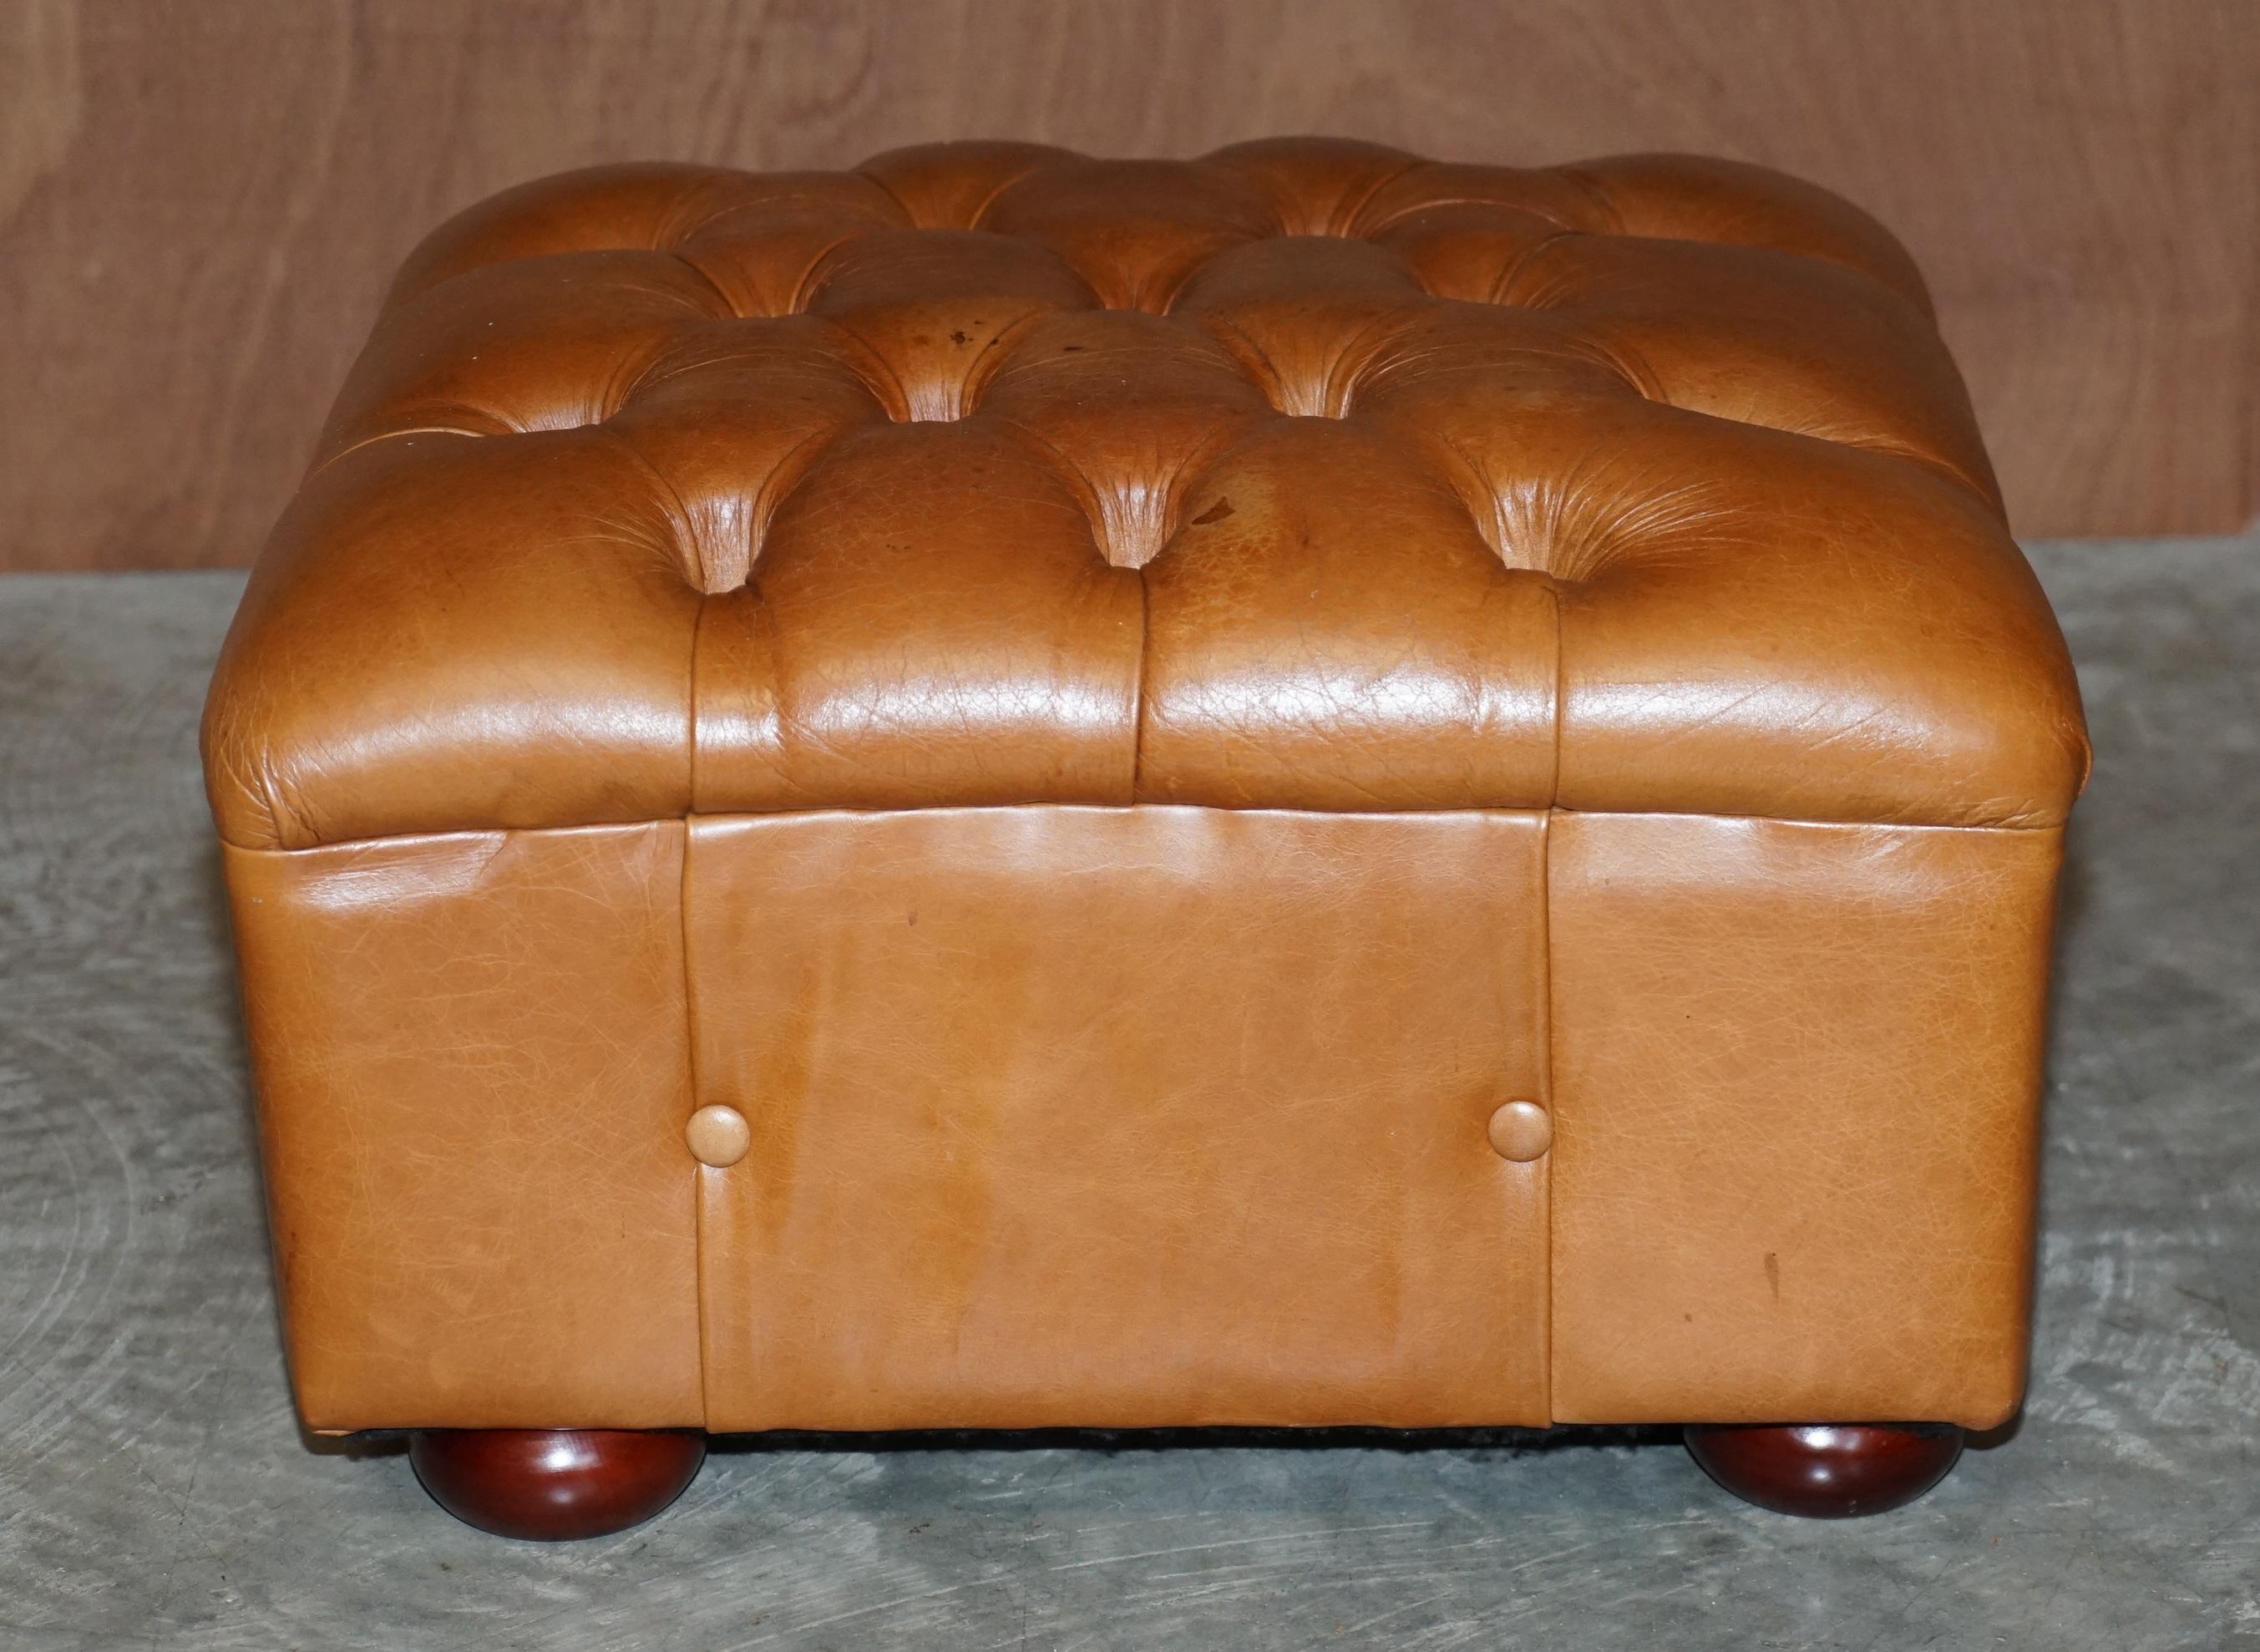 20th Century Chesterfield Brown Leather Tufted Square Footstool Vintage Biker Tan Leather For Sale